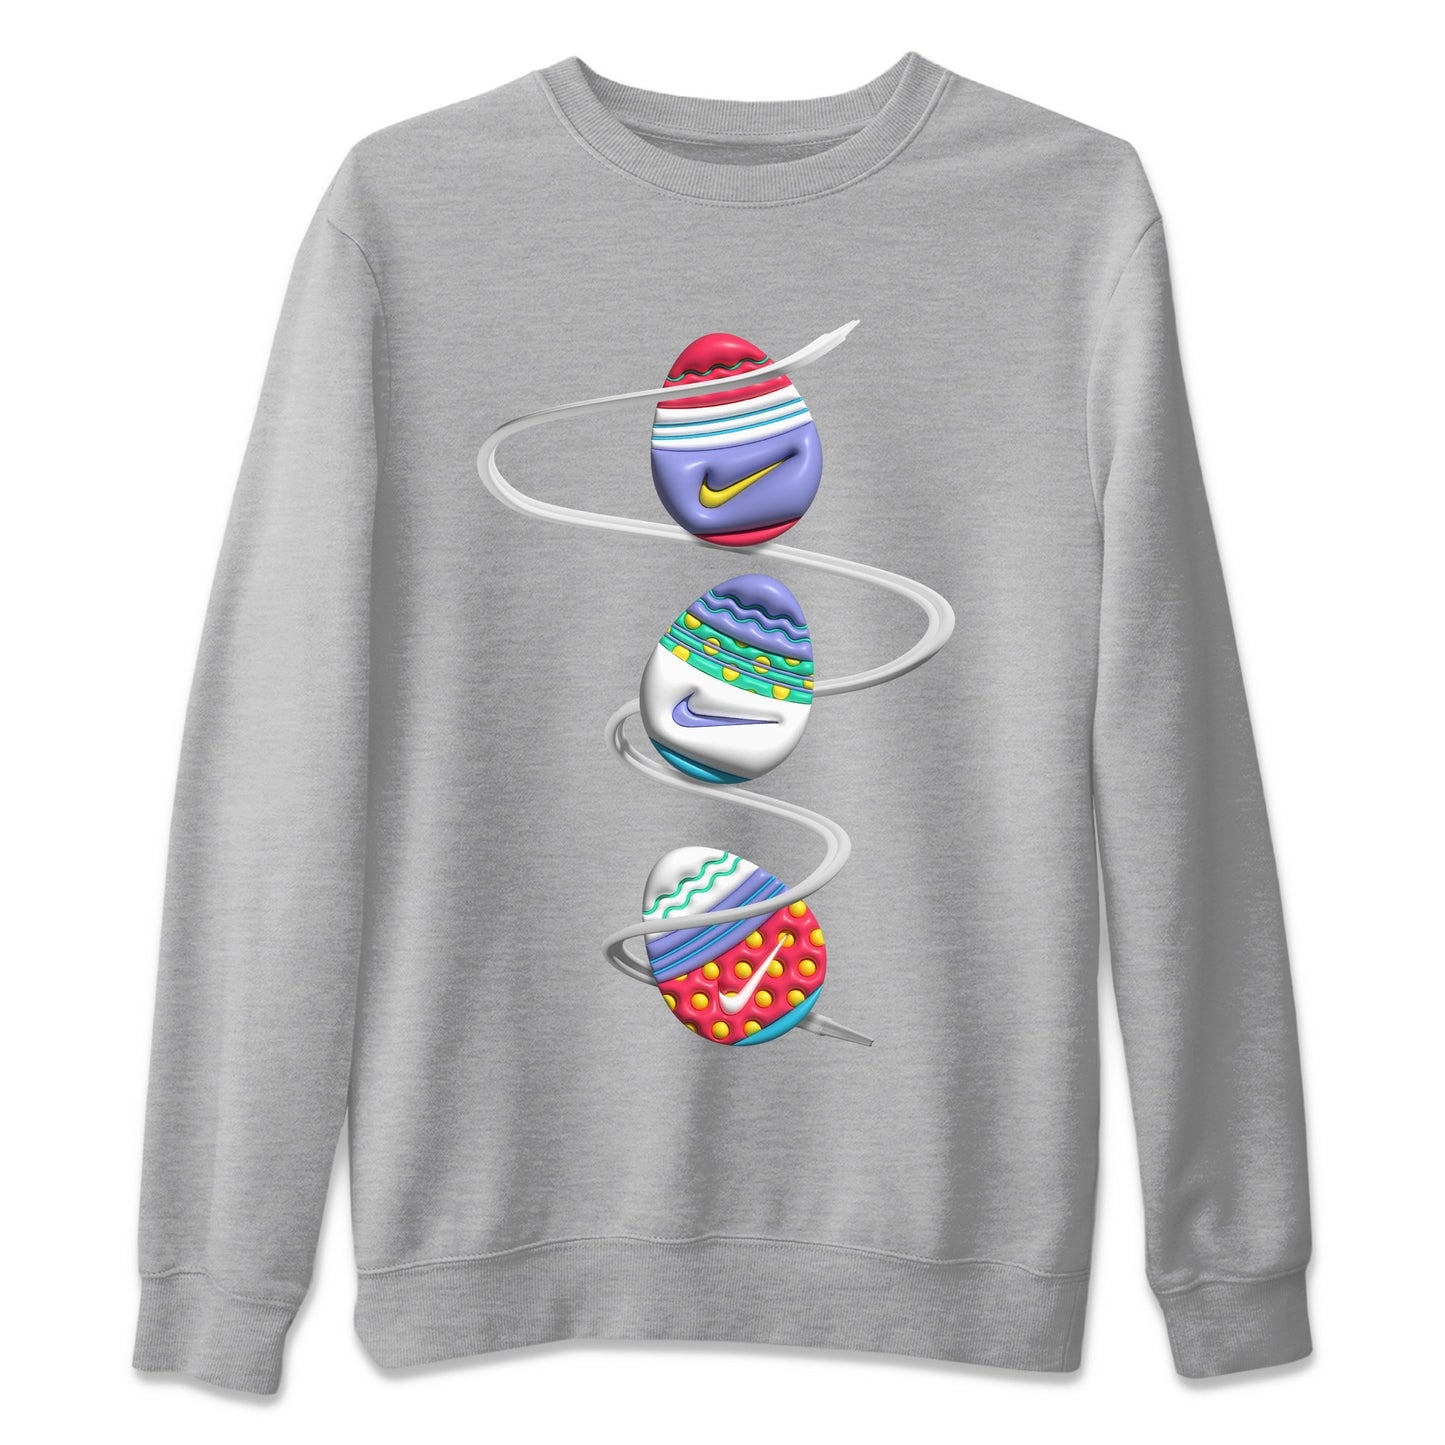 Dunk Easter Candy Sneaker Tees Drip Gear Zone 3D Easter Eggs Sneaker Tees Nike Easter Shirt Unisex Shirts Heather Grey 2